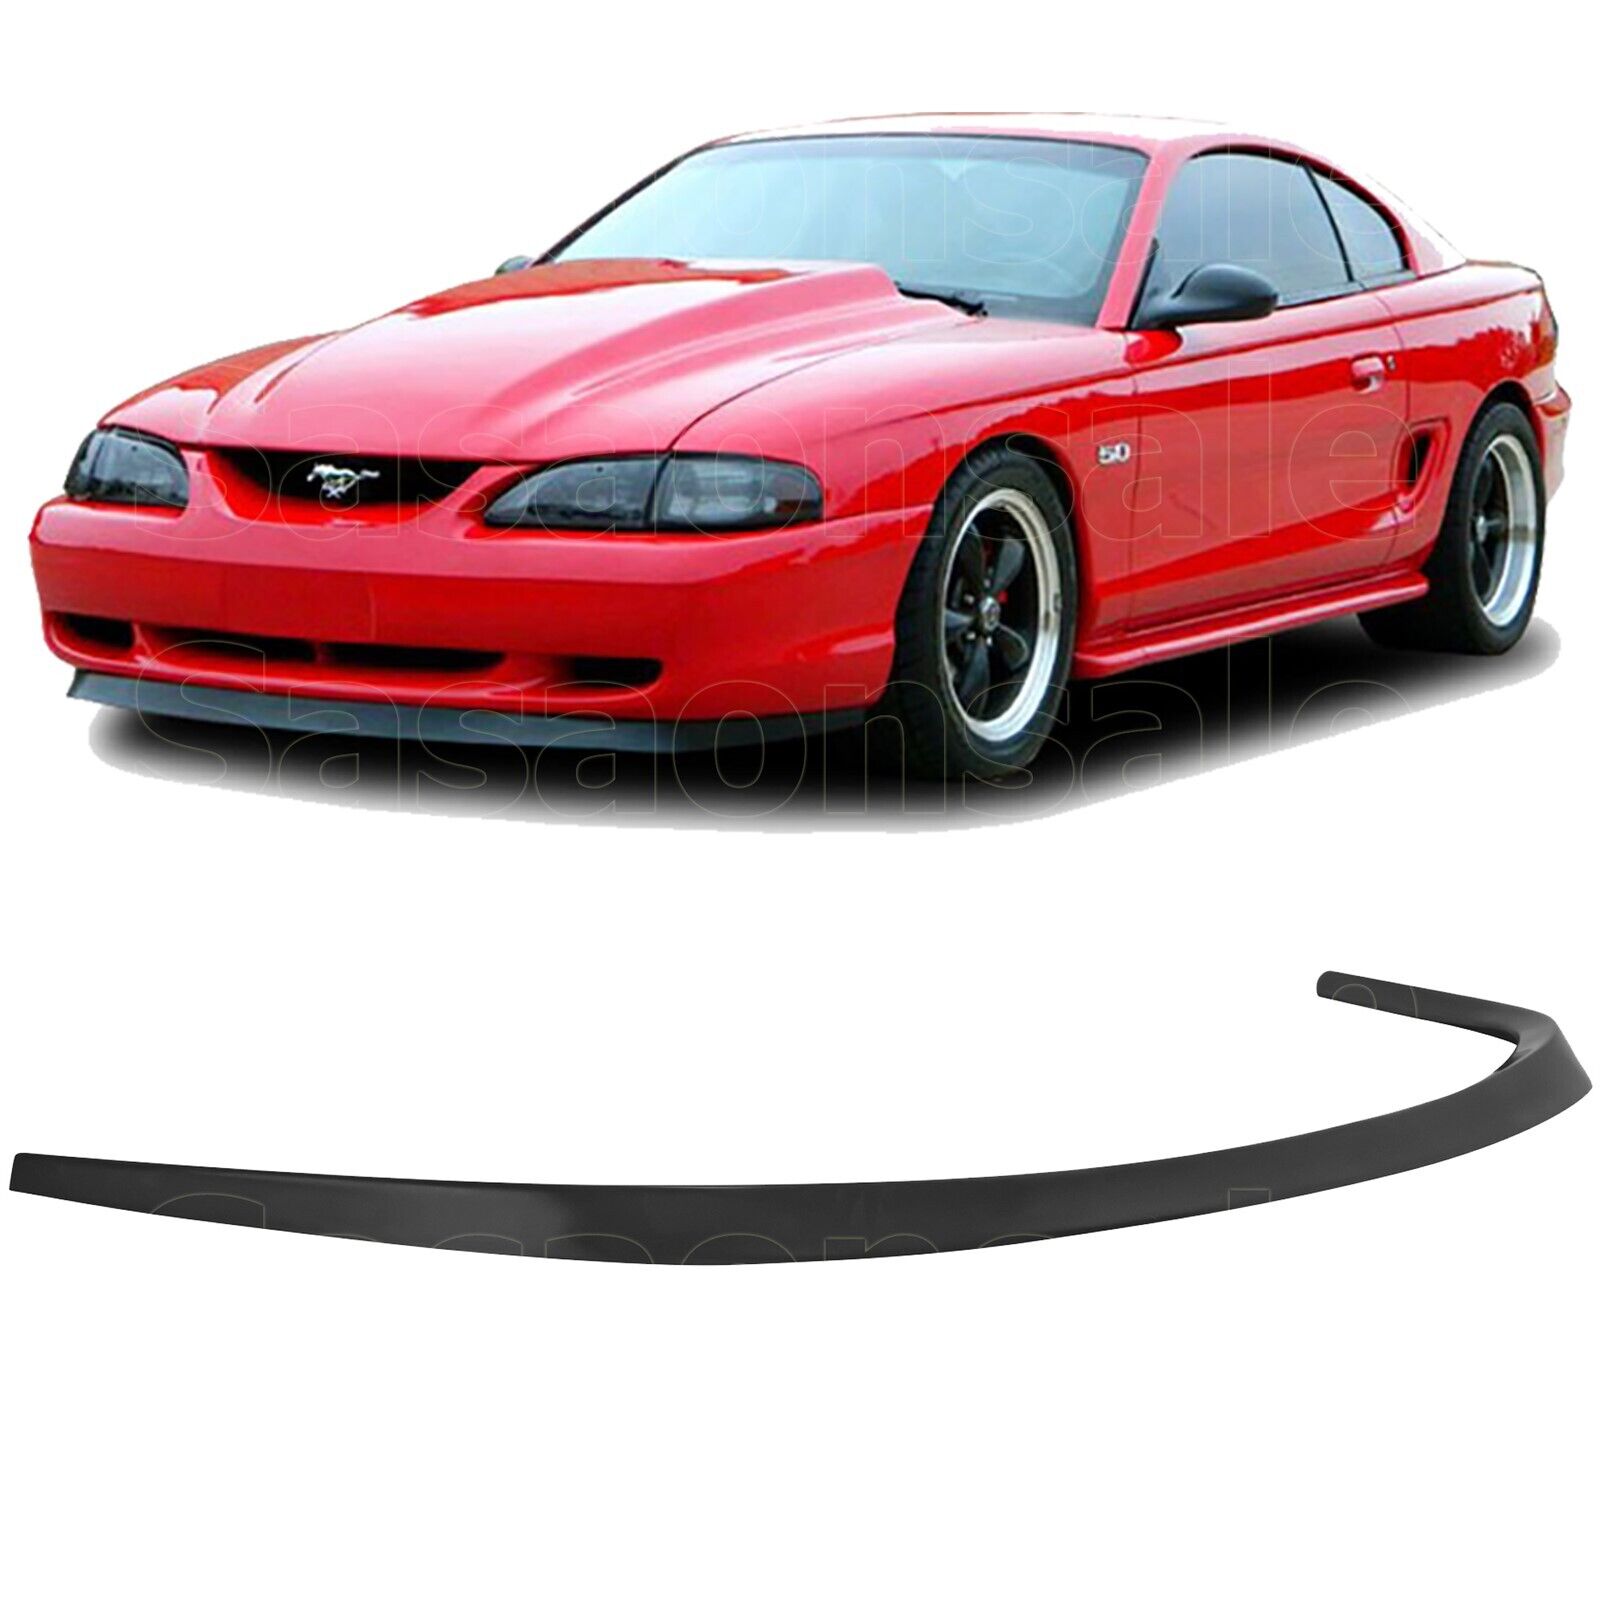 [SASA] Made for 1994-1998 Ford Mustang V8 GT Mach 1 PU Front Bumper Lip Splitter